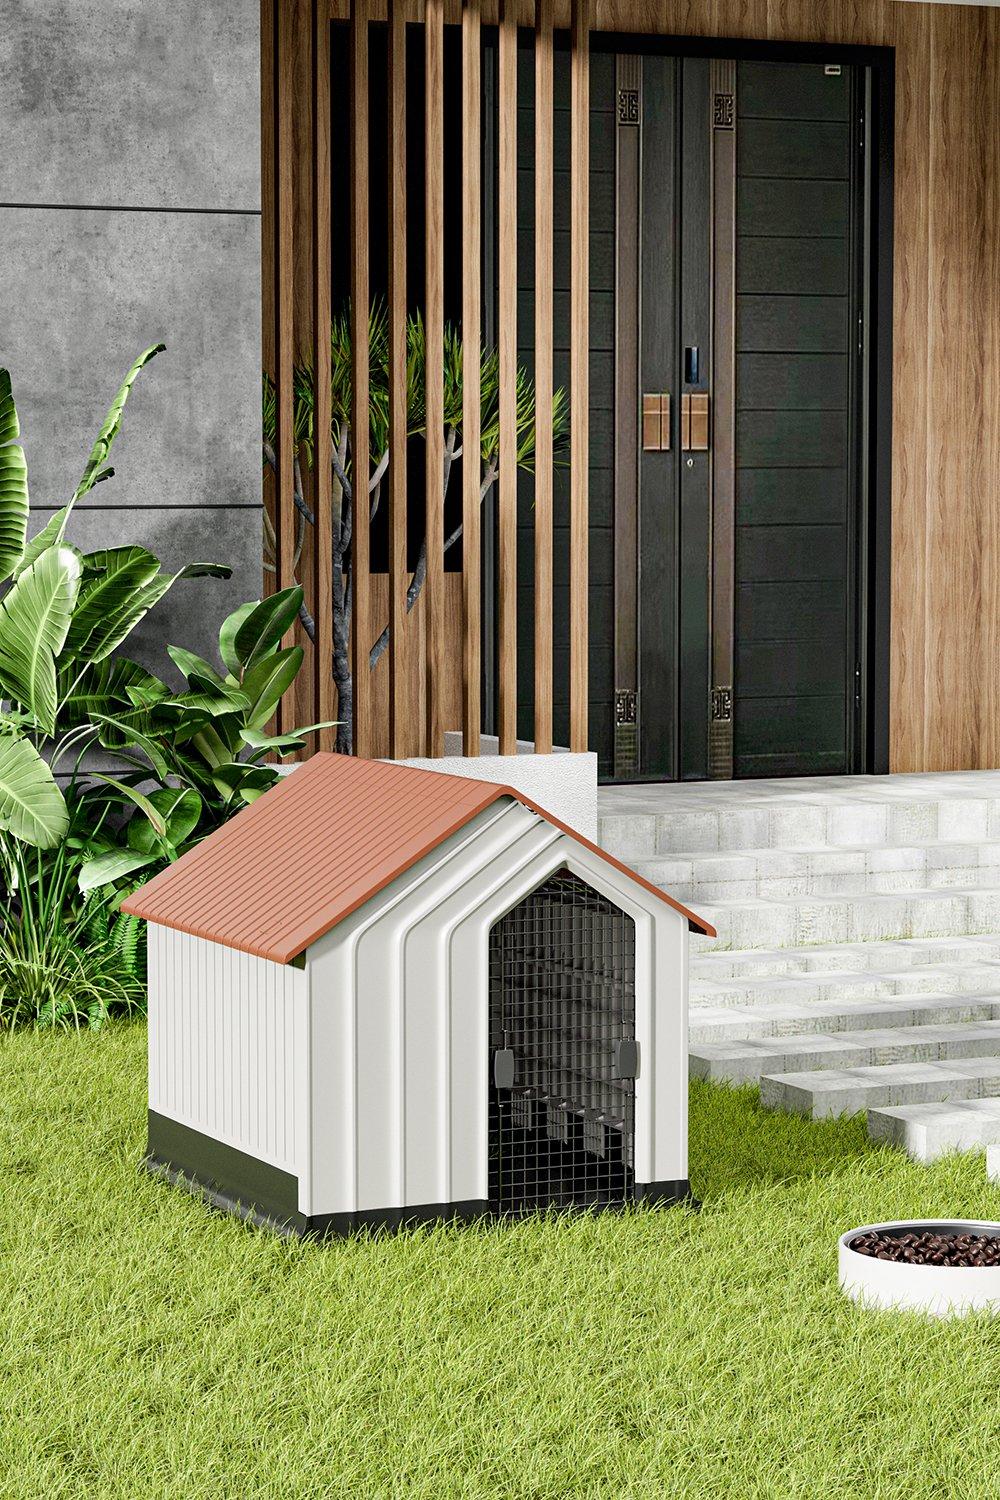 62*61*60cm Orange And White Waterproof Plastic Dog House Pet Kennel with Door